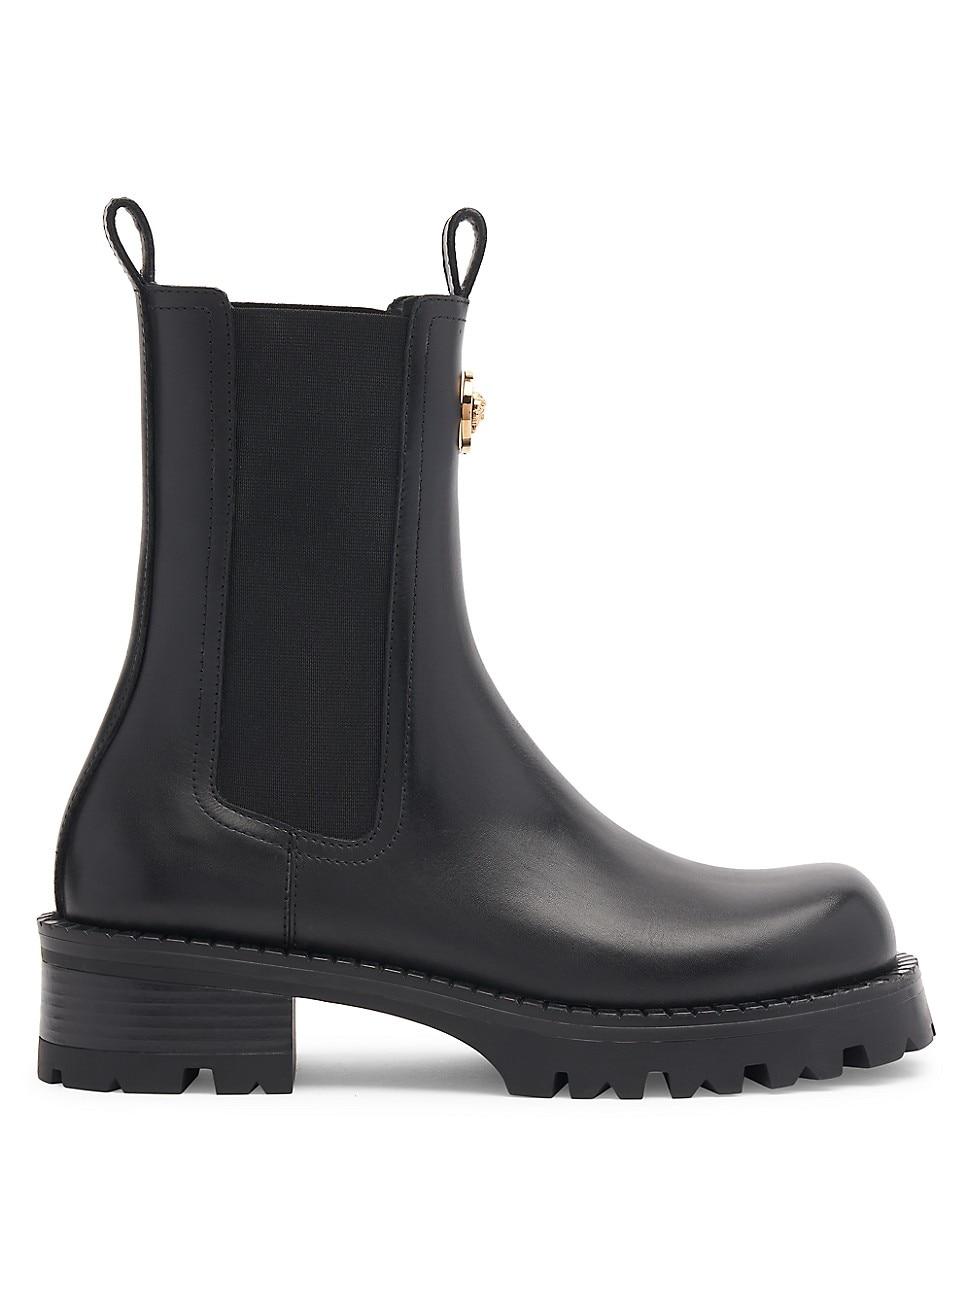 Versace Leather Chelsea Boots in Black | Lyst